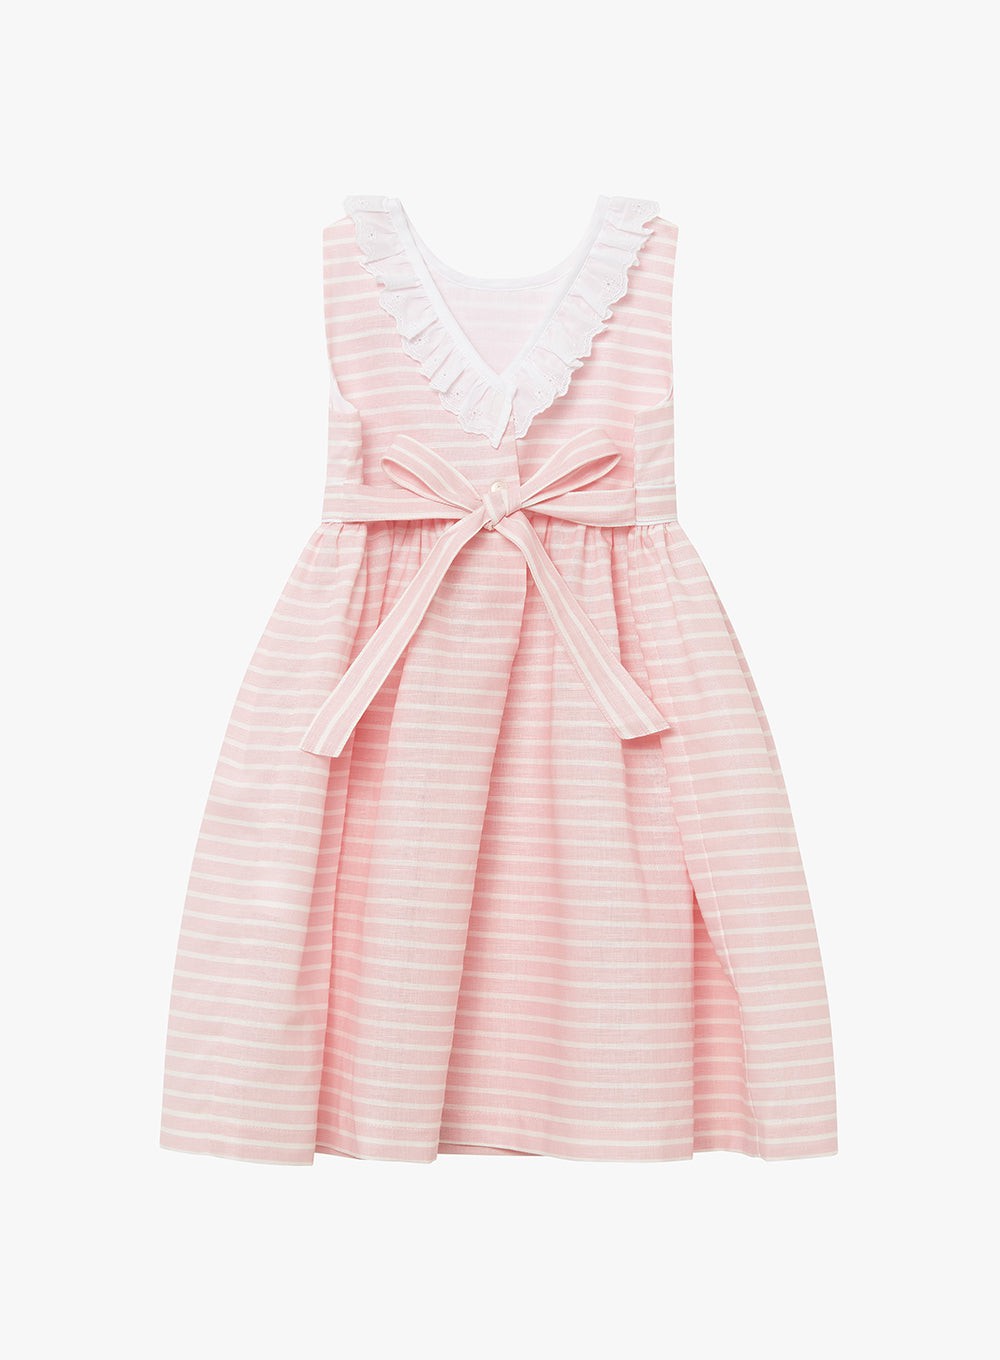 Confiture Dress Chloe Anglaise Dress in Pink Stripe